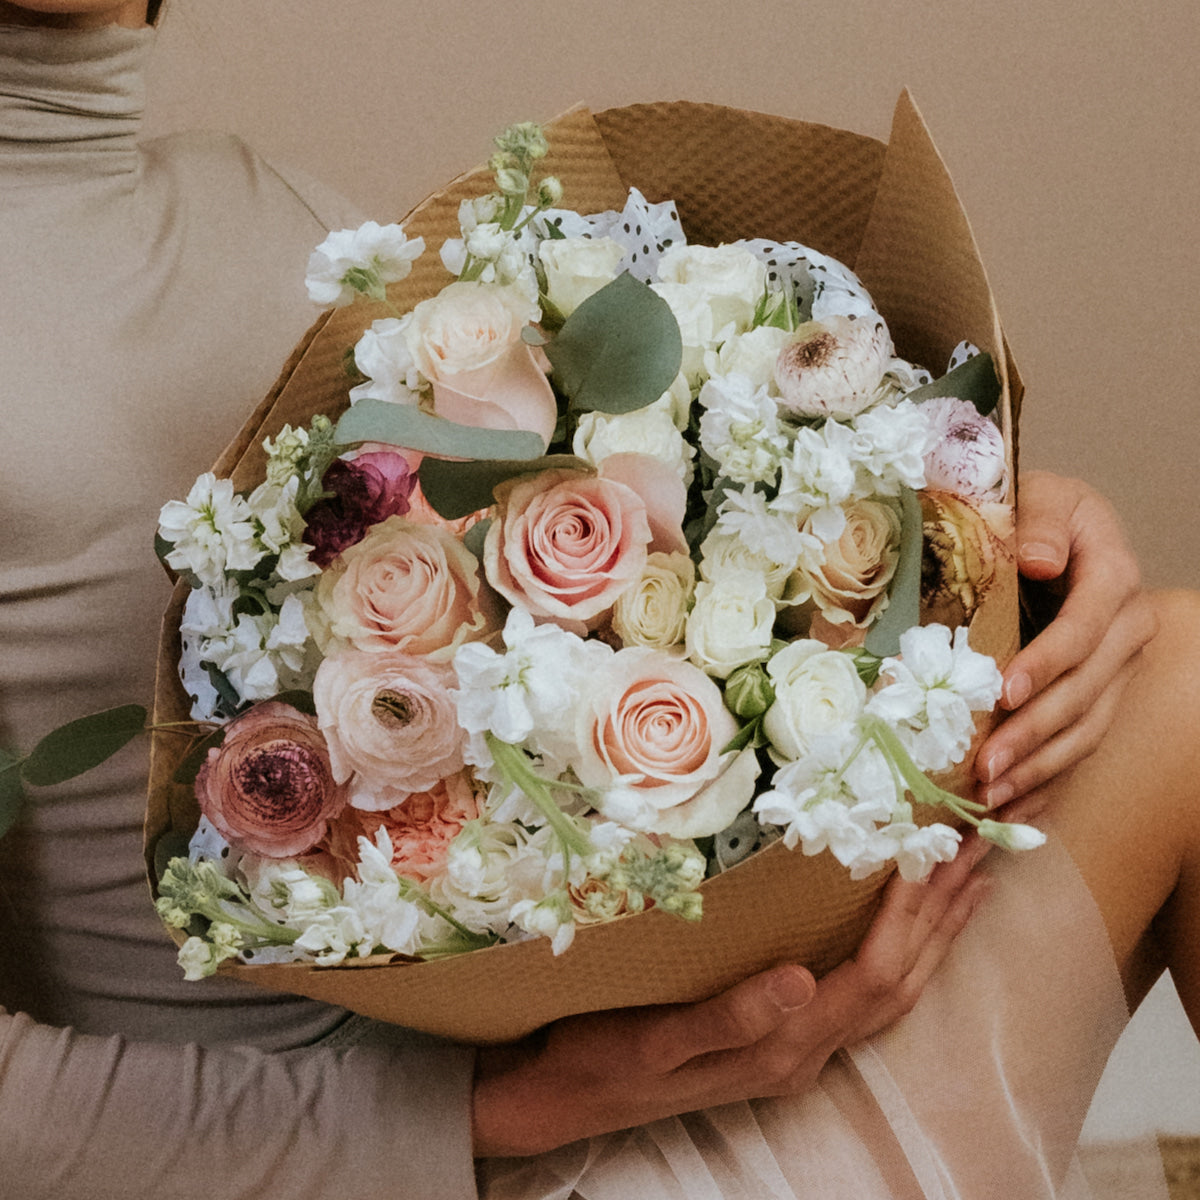 Bouquet of light-colored roses